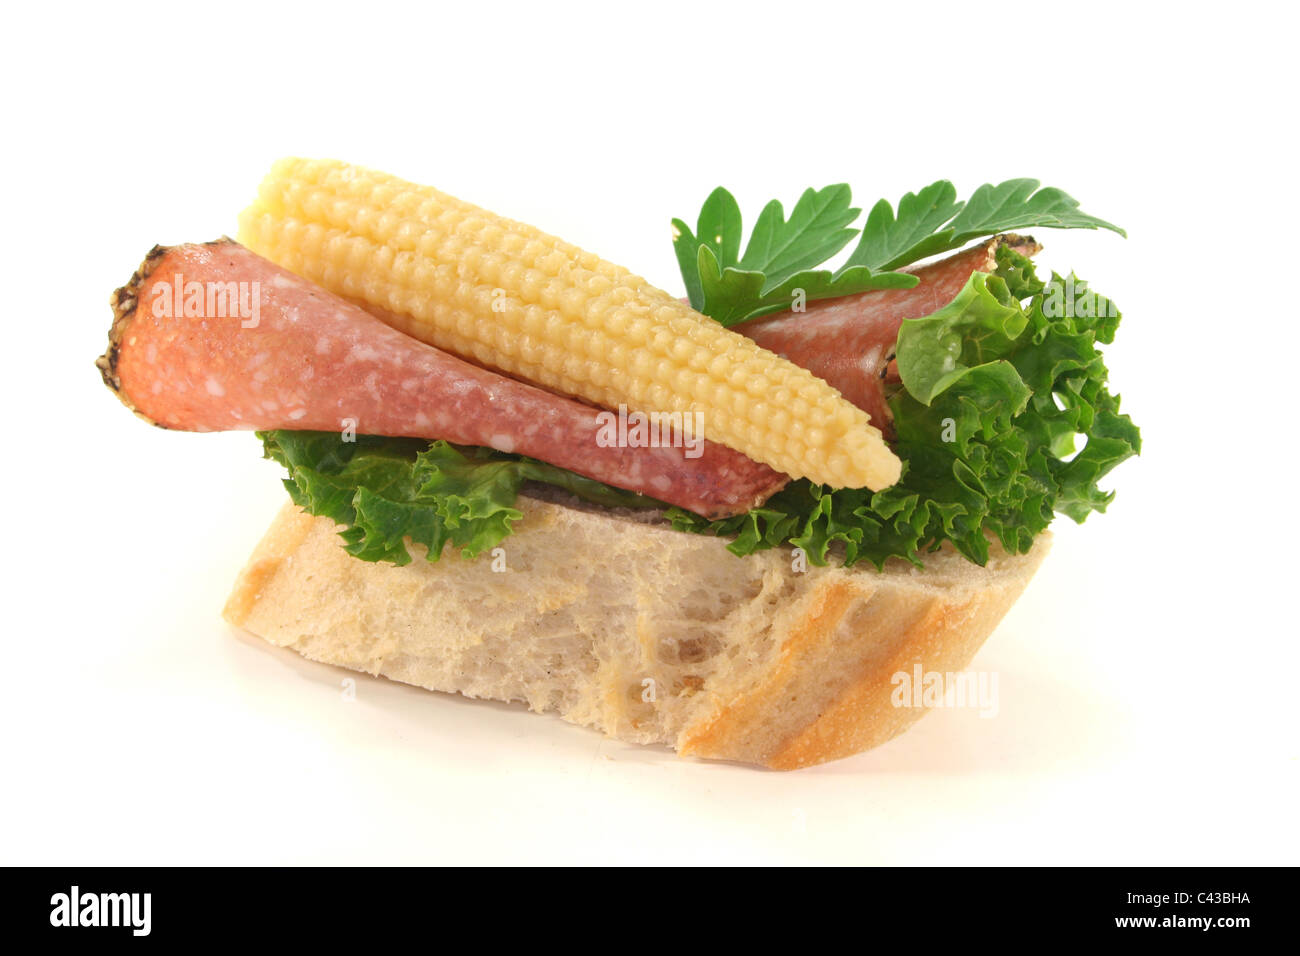 Canape with lettuce, salami, corncob and parsley on a white background Stock Photo